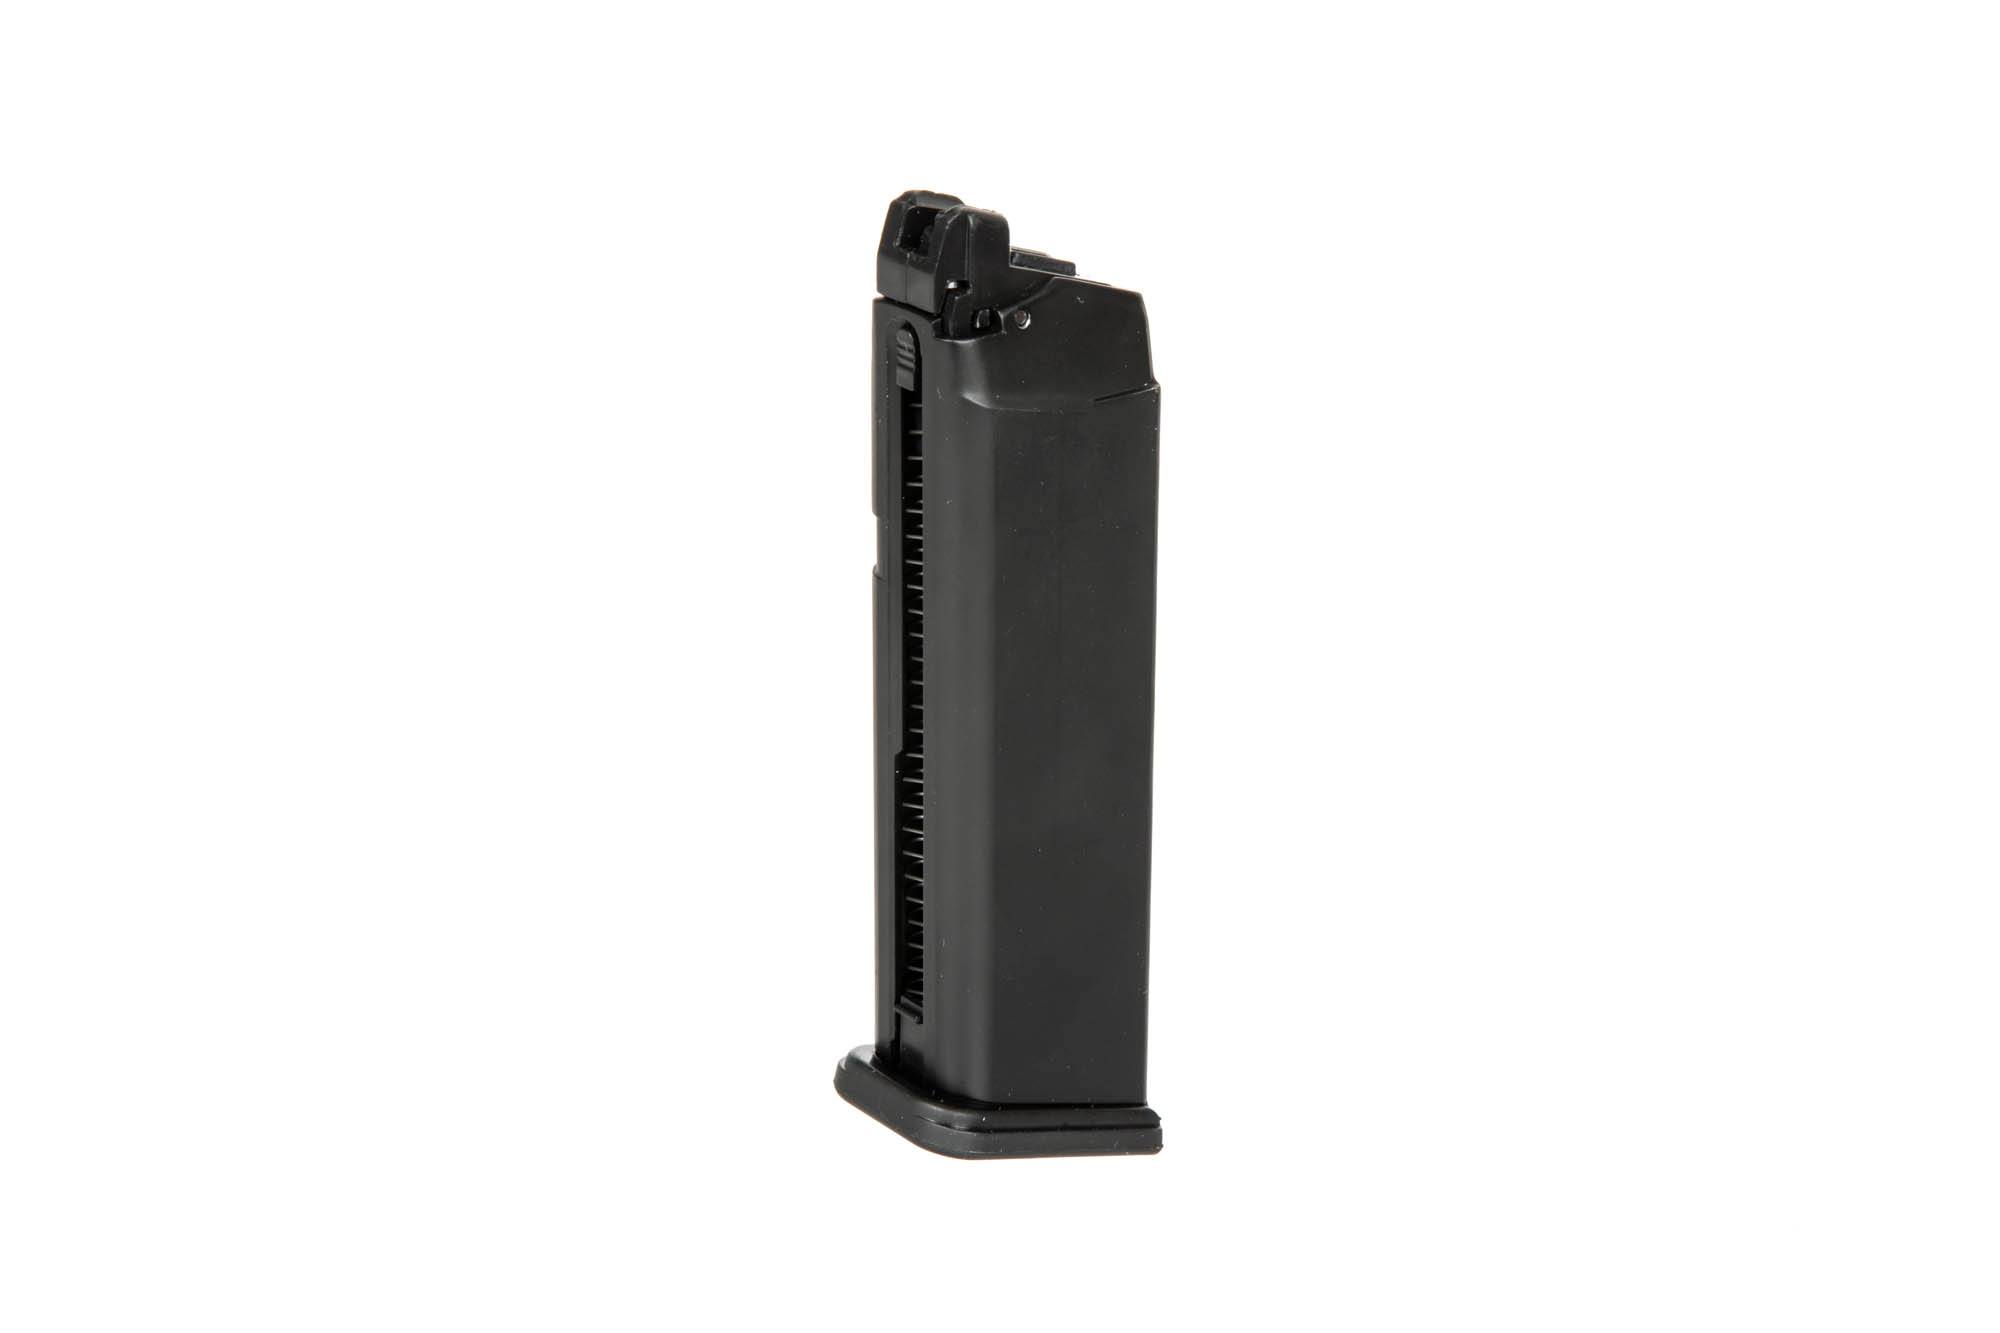 Green Gas 24 BB Magazine for Double Bell 721 (G17) Replicas